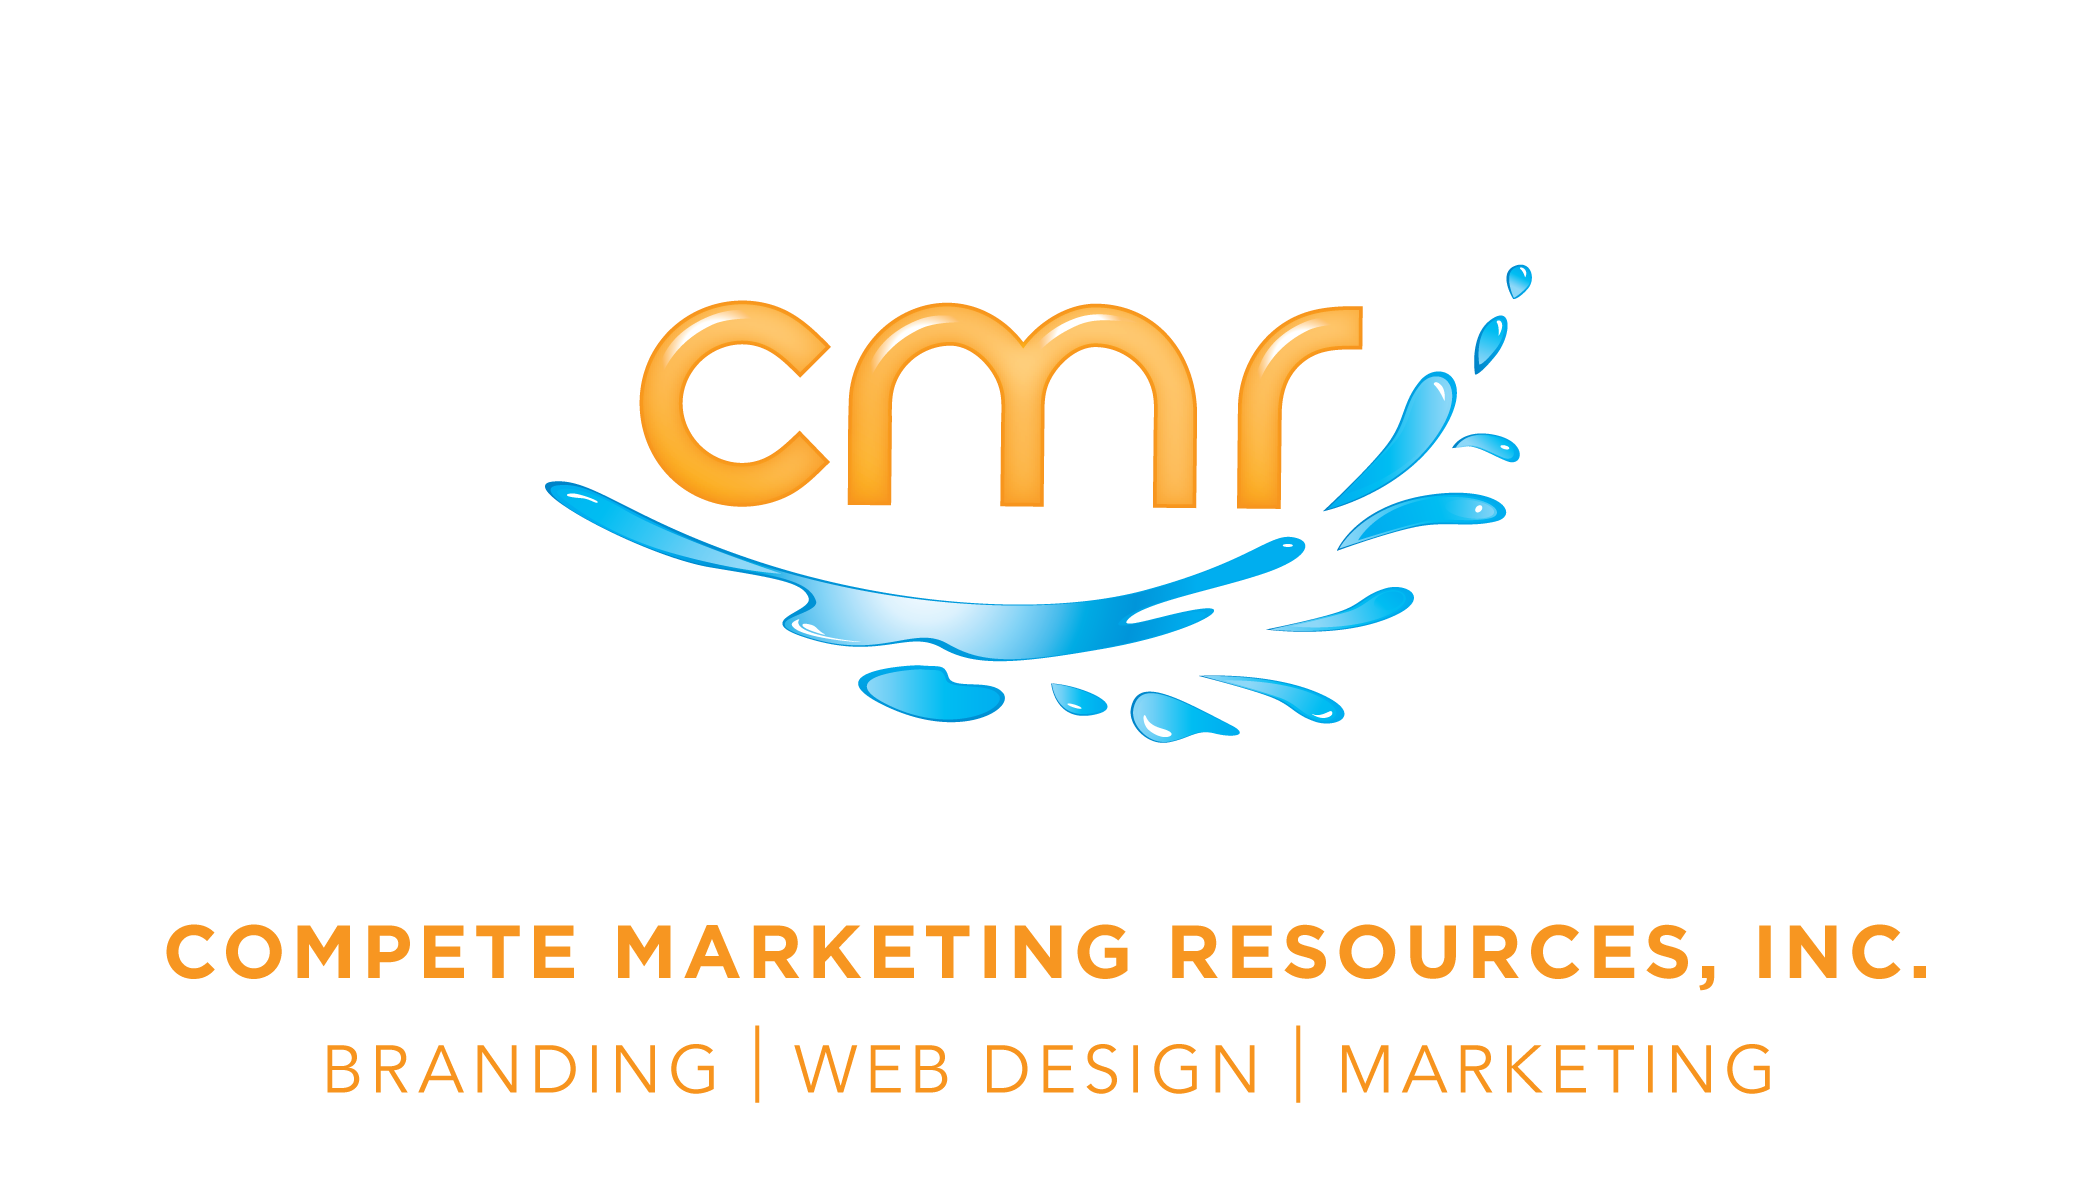 Complete Marketing Resources, Inc. can assist with all of your branding, web design, and marketing needs.